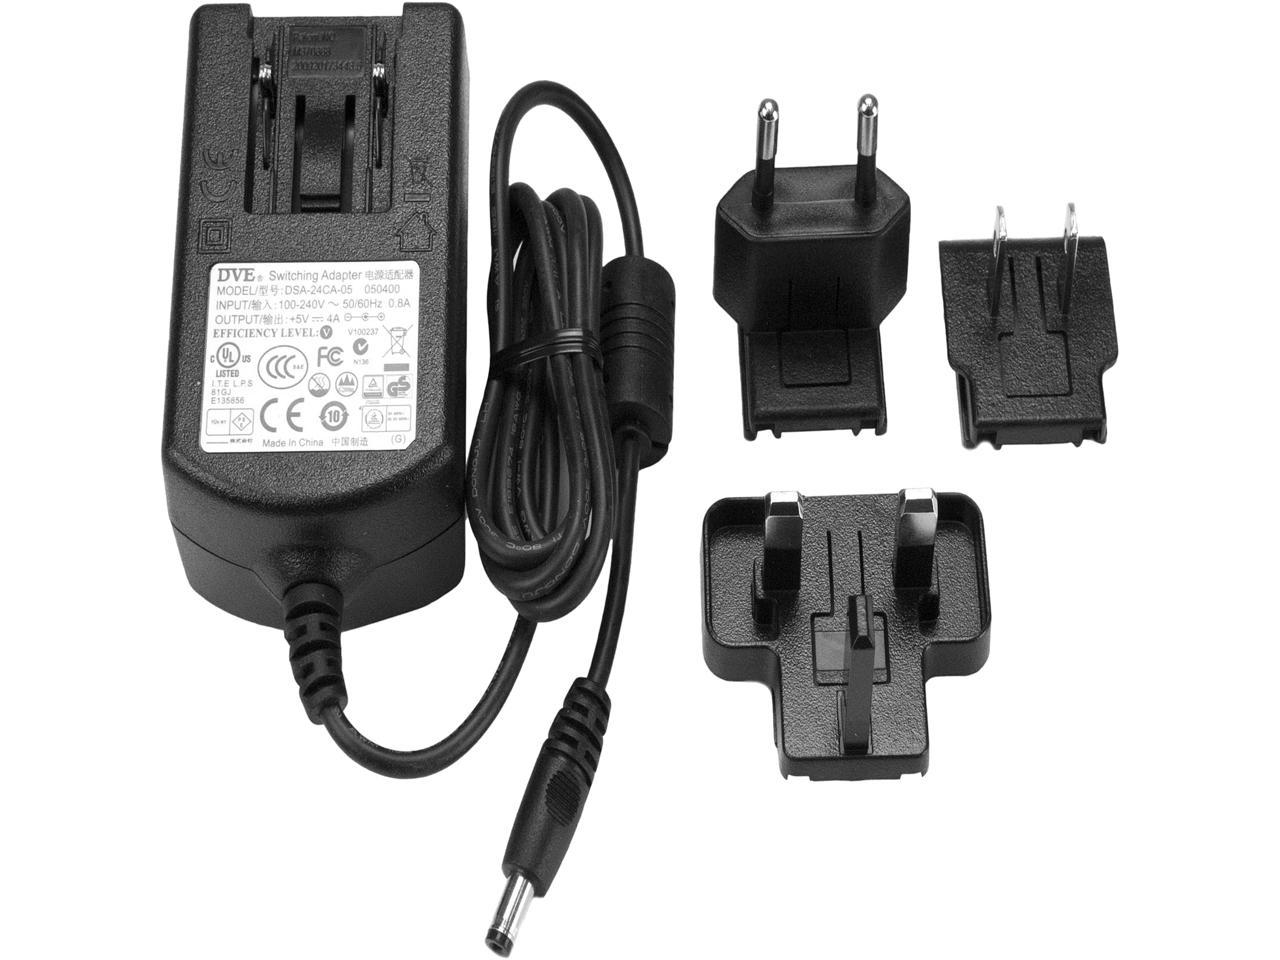 StarTech SVA5M4NEUA Replacement 5V DC Power Adapter - 5 Volts, 4 Amps - image 1 of 4